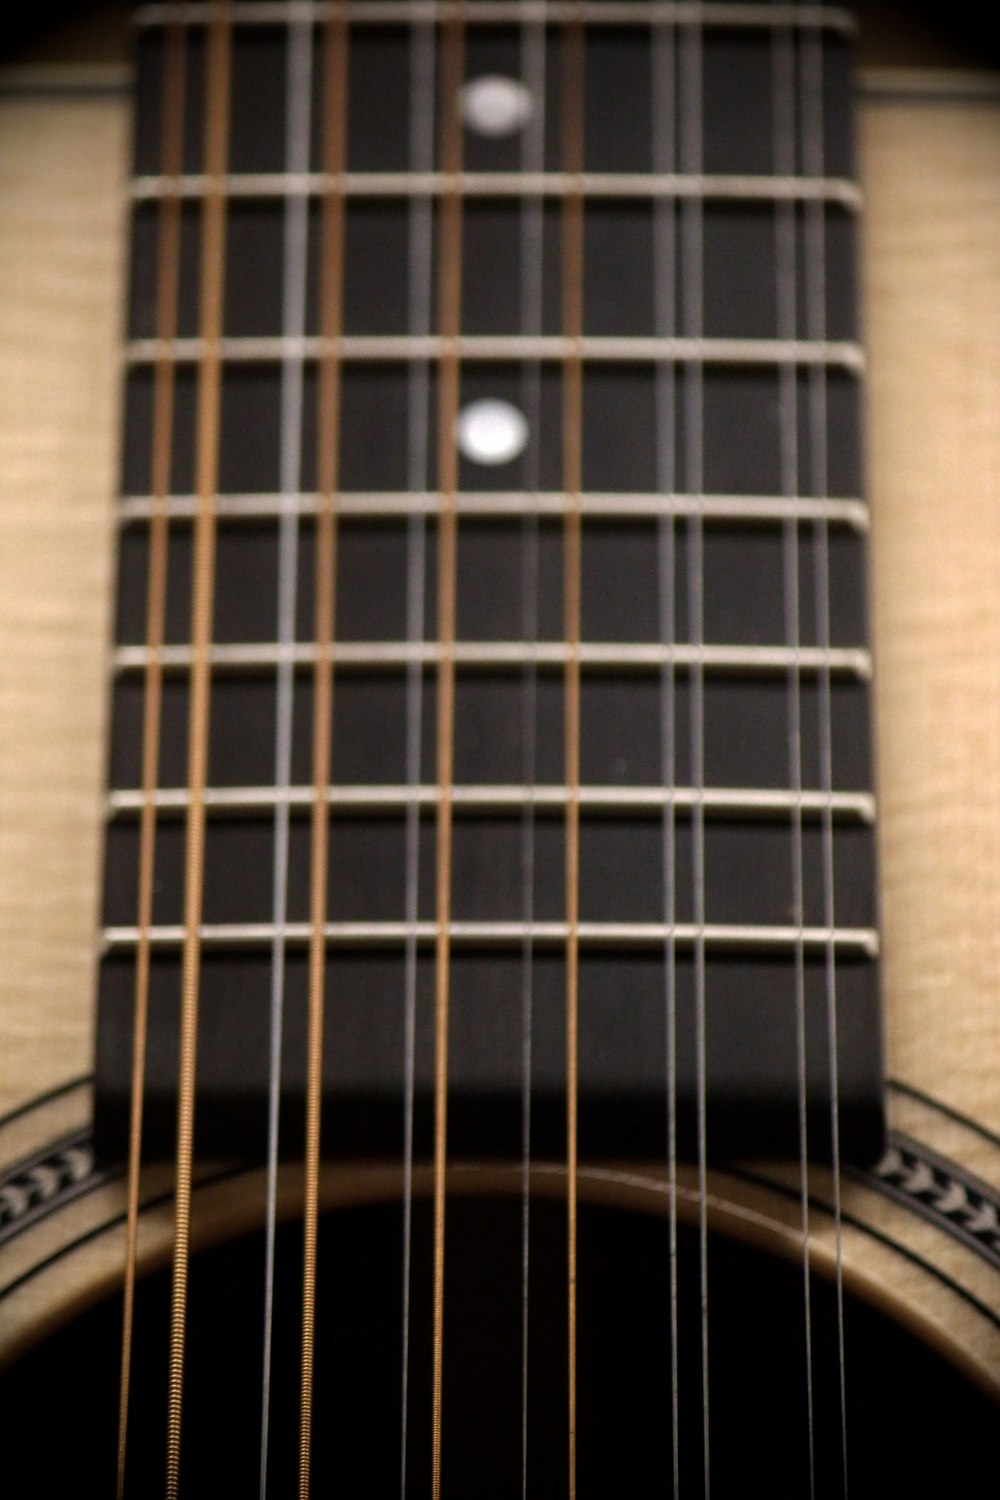 a close up of a guitar's neck and frets